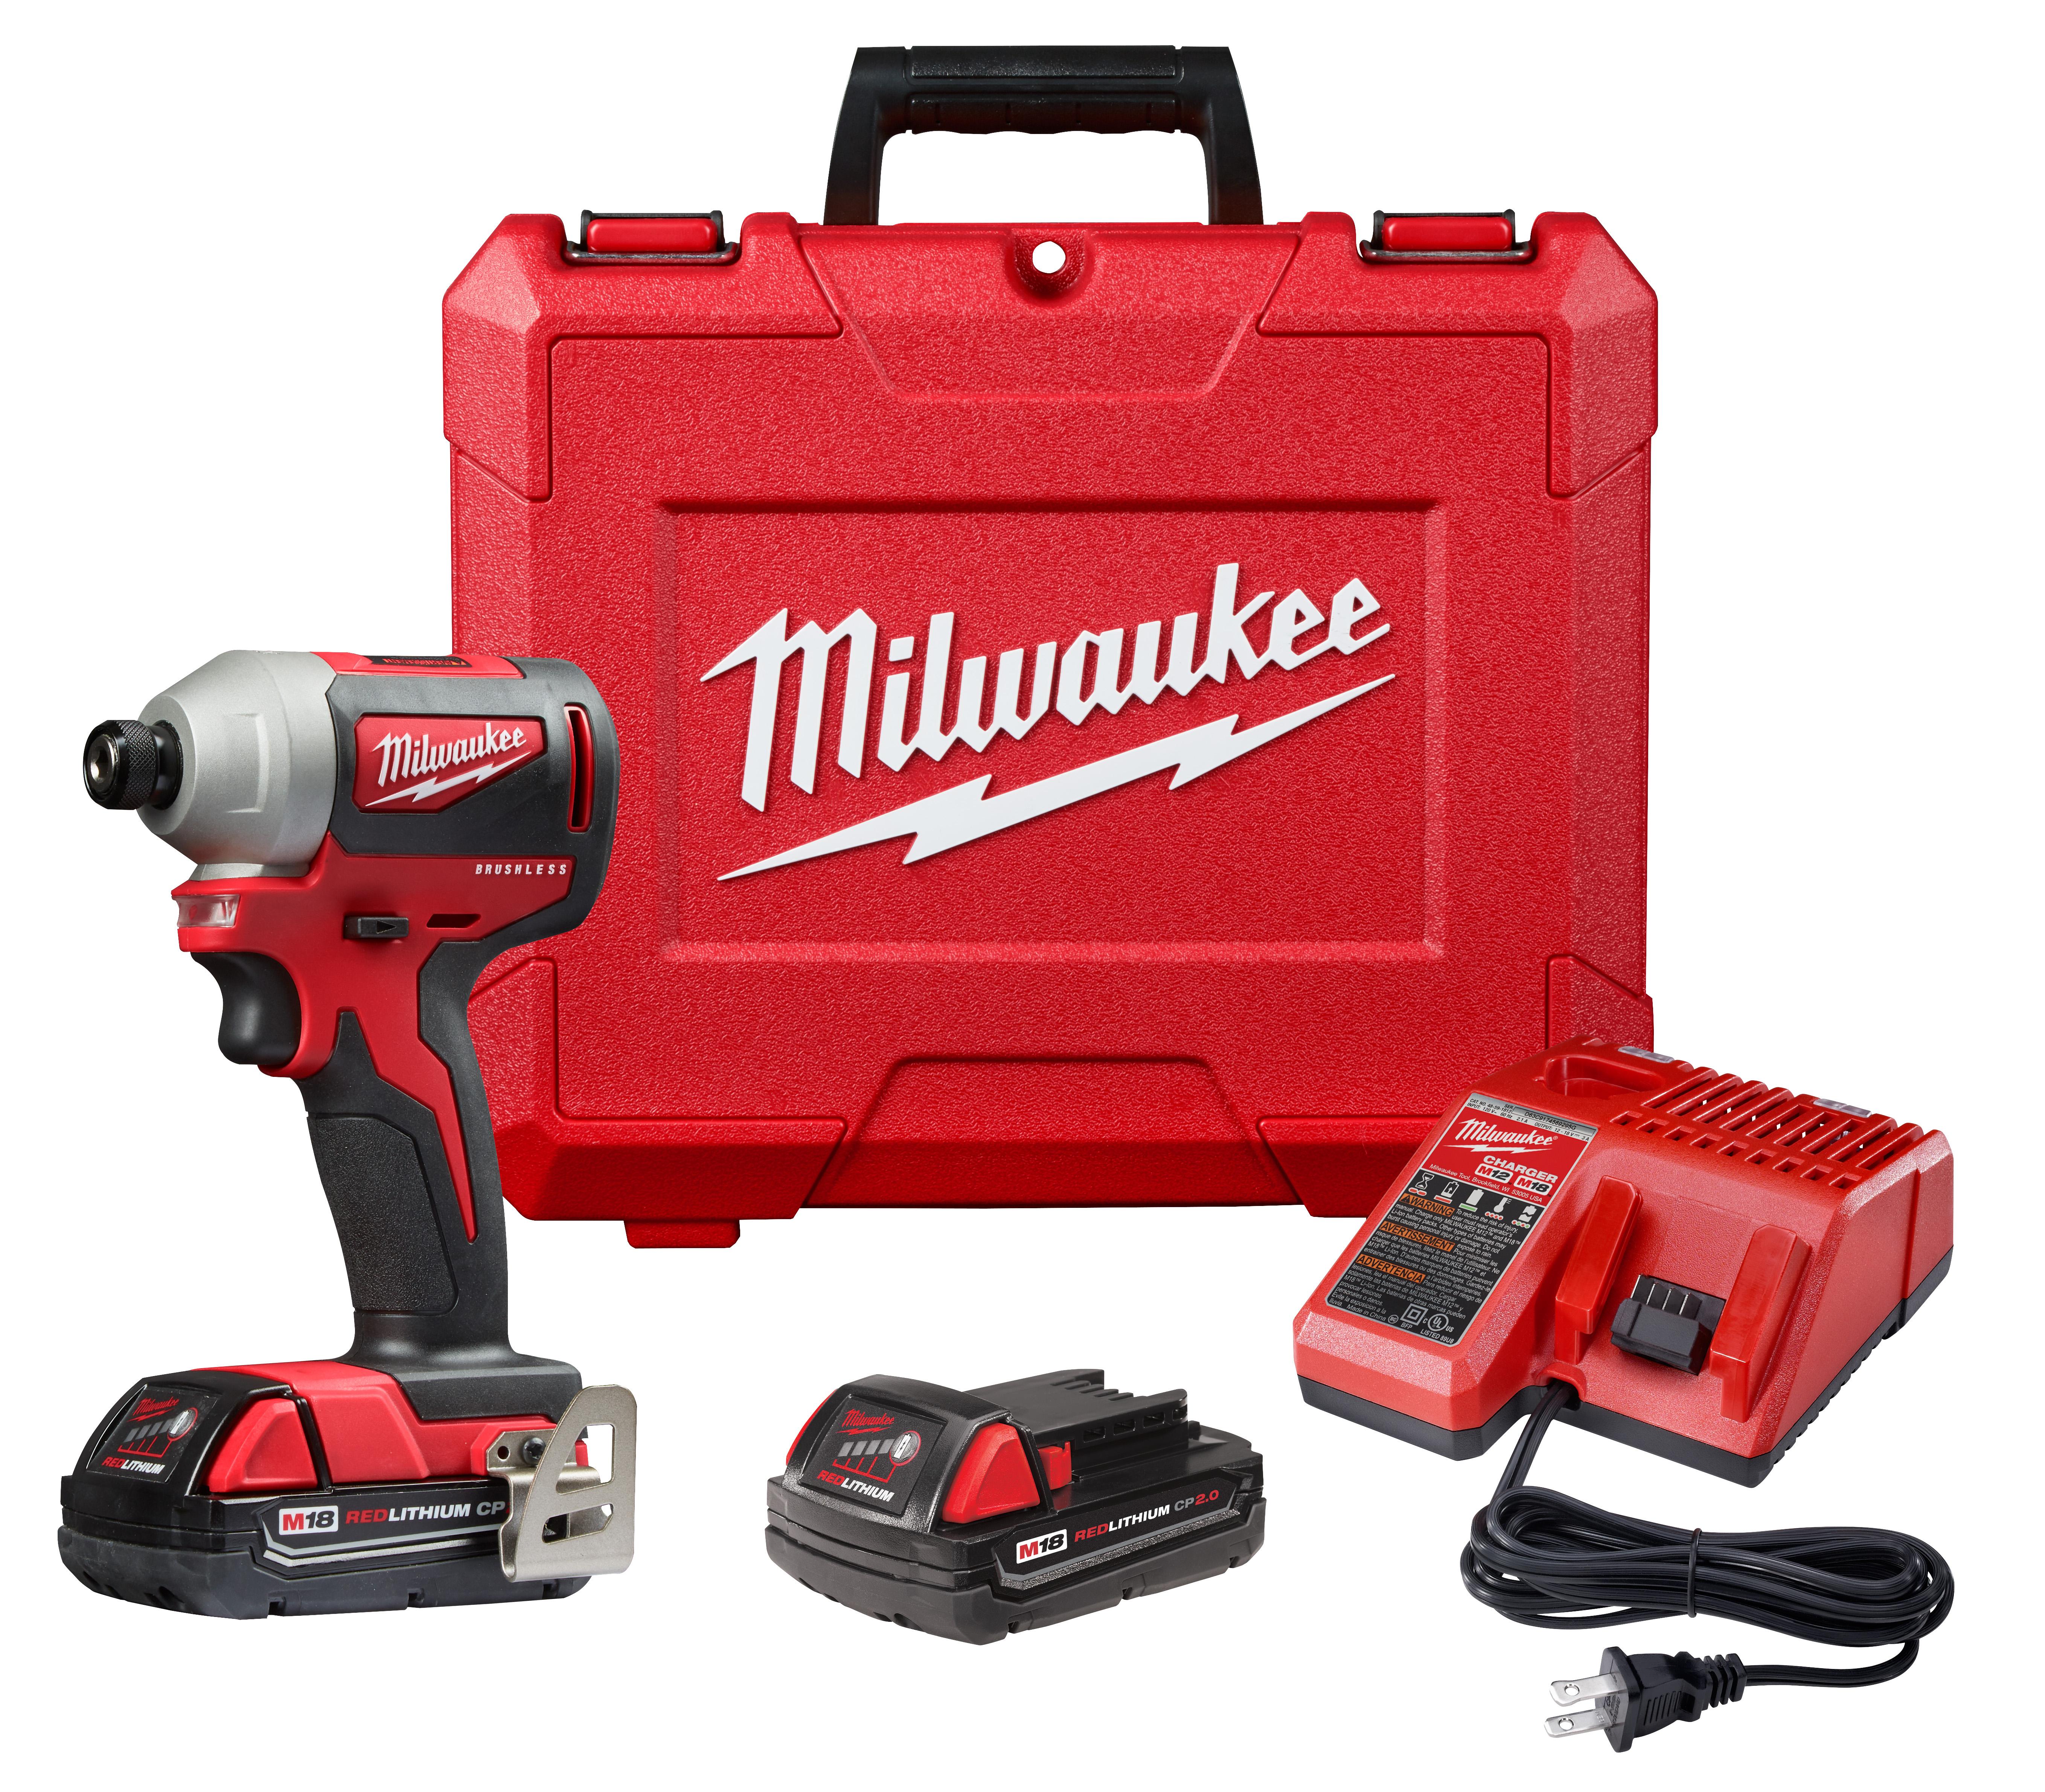 Milwaukee® M18™ FUEL™ 2760-22 Cordless Impact Driver Kit, 1/4 in Hex/Straight Drive, 4000 bpm, 450 in-lb Torque, 18 VDC, 5 in OAL